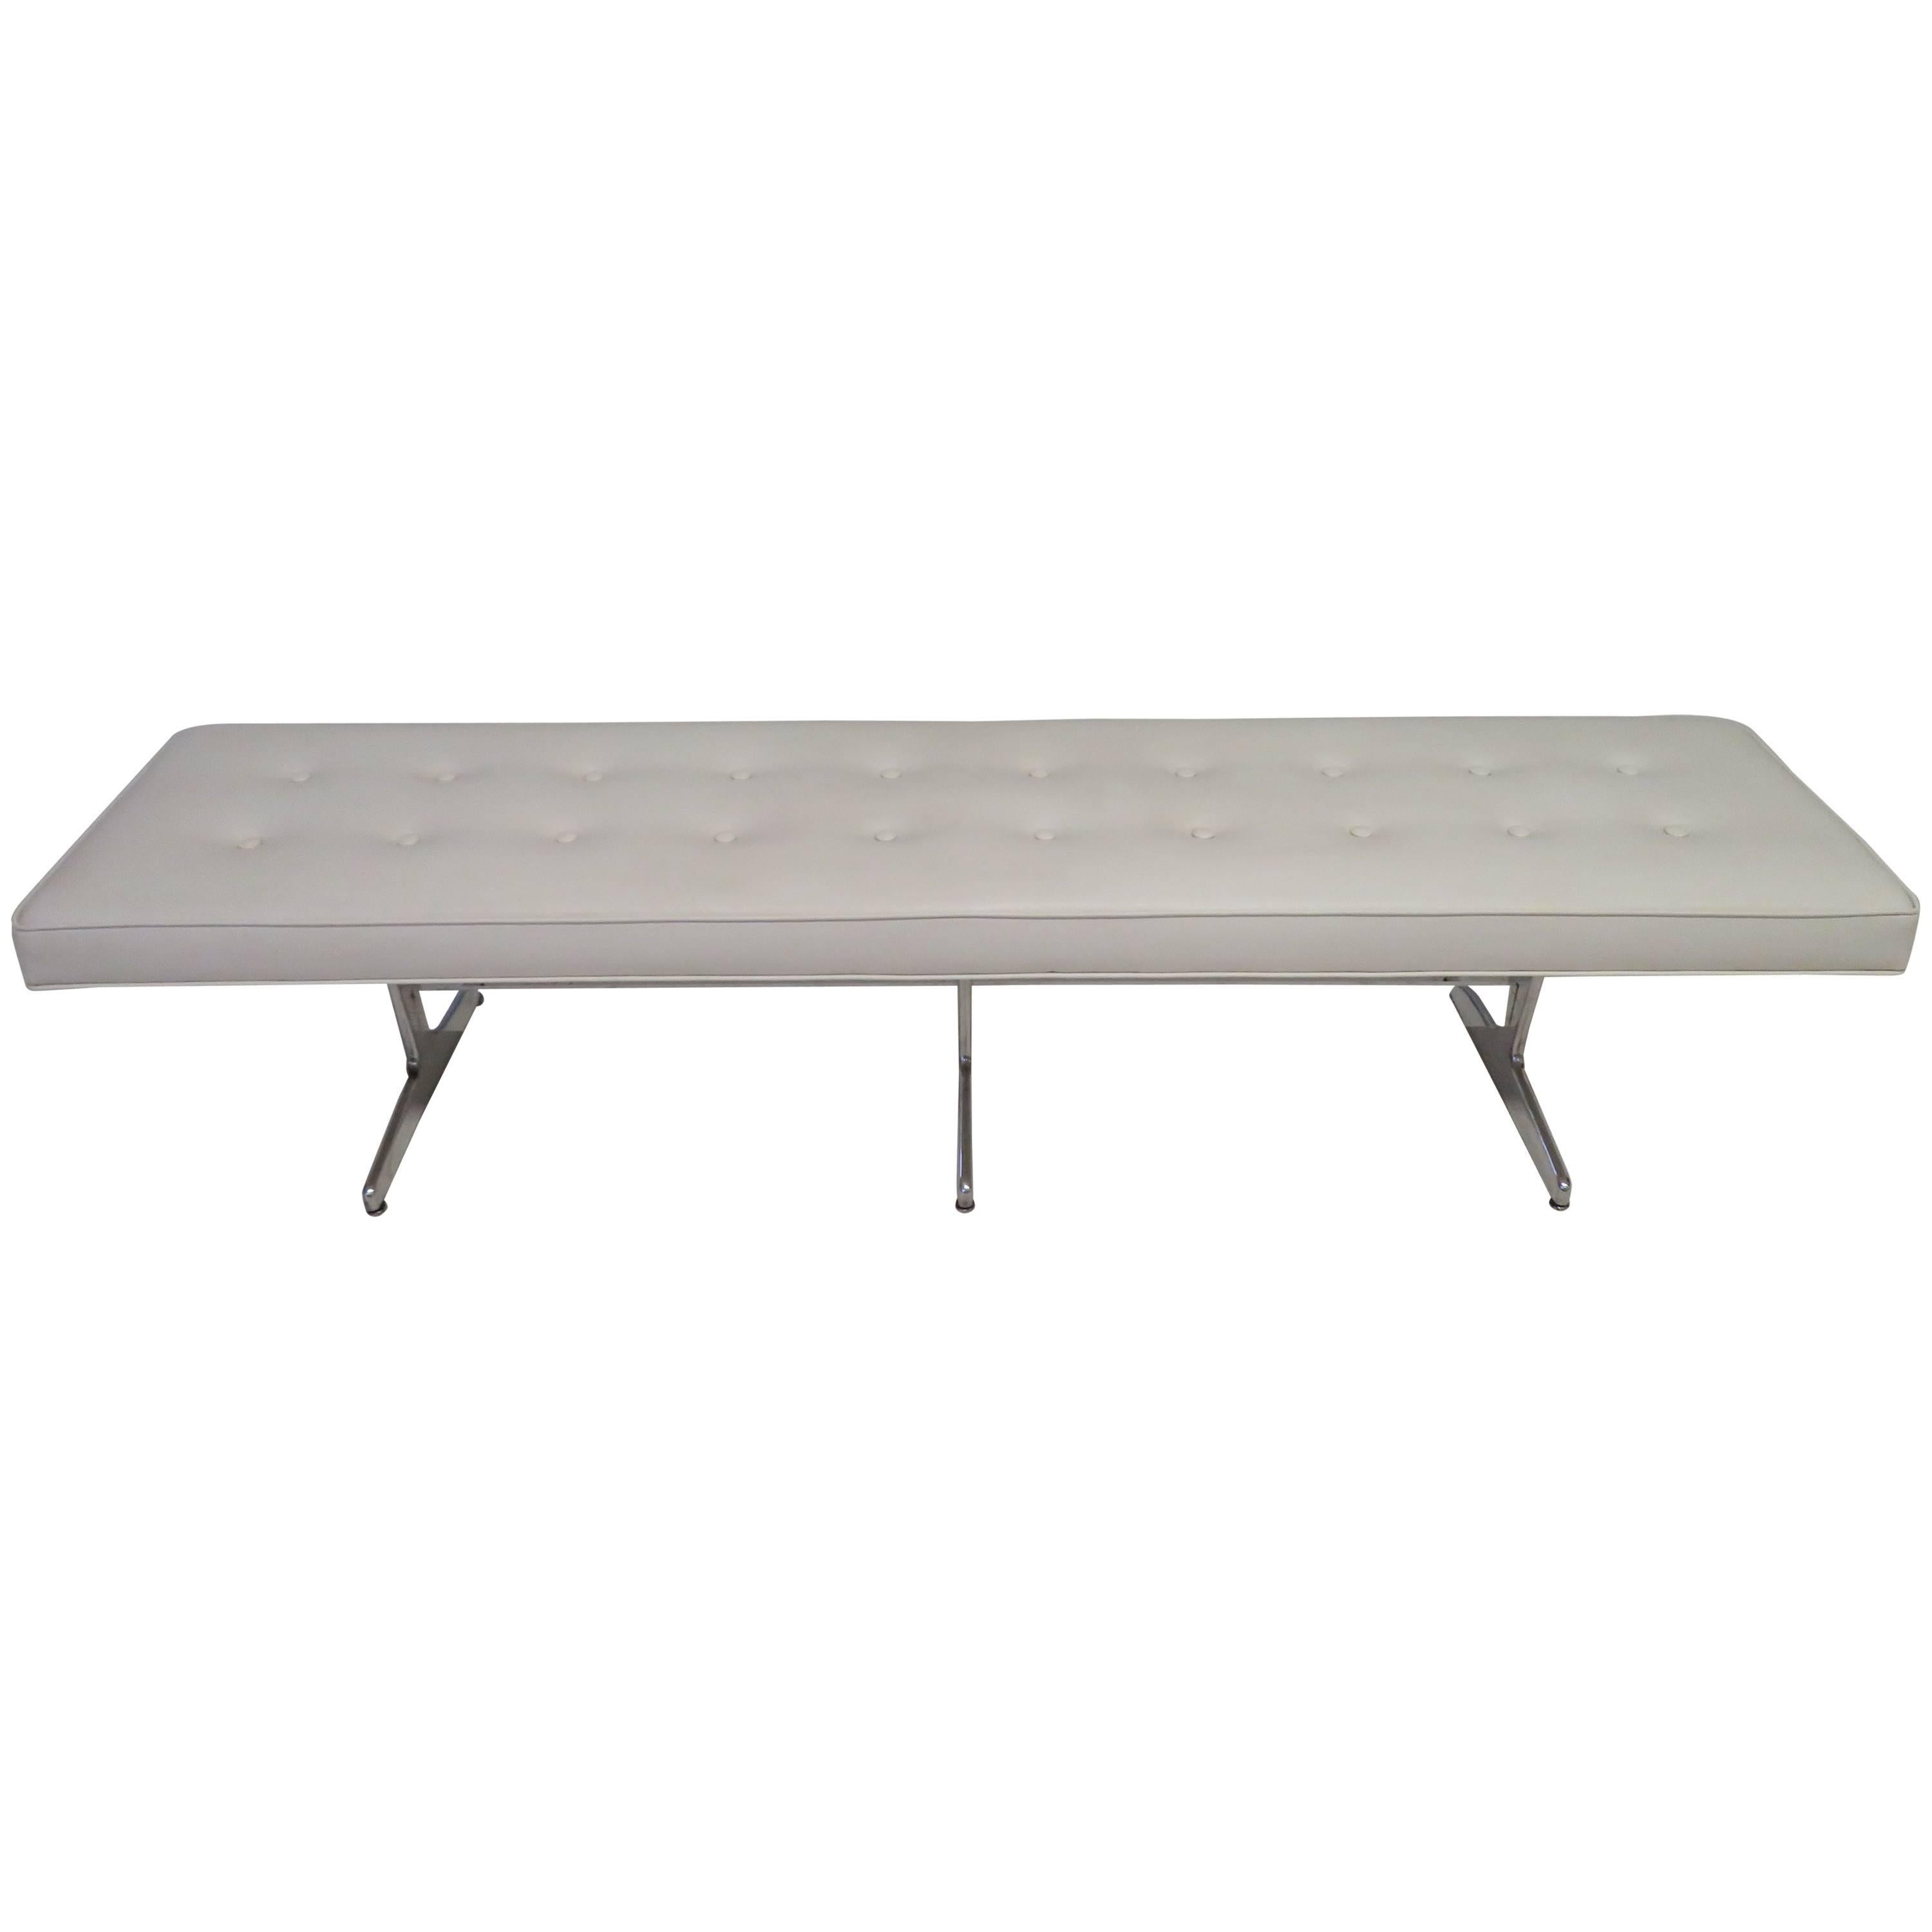 Magnificent Herman Miller Style Long Faux Leather Tufted Aluminum Base Bench For Sale